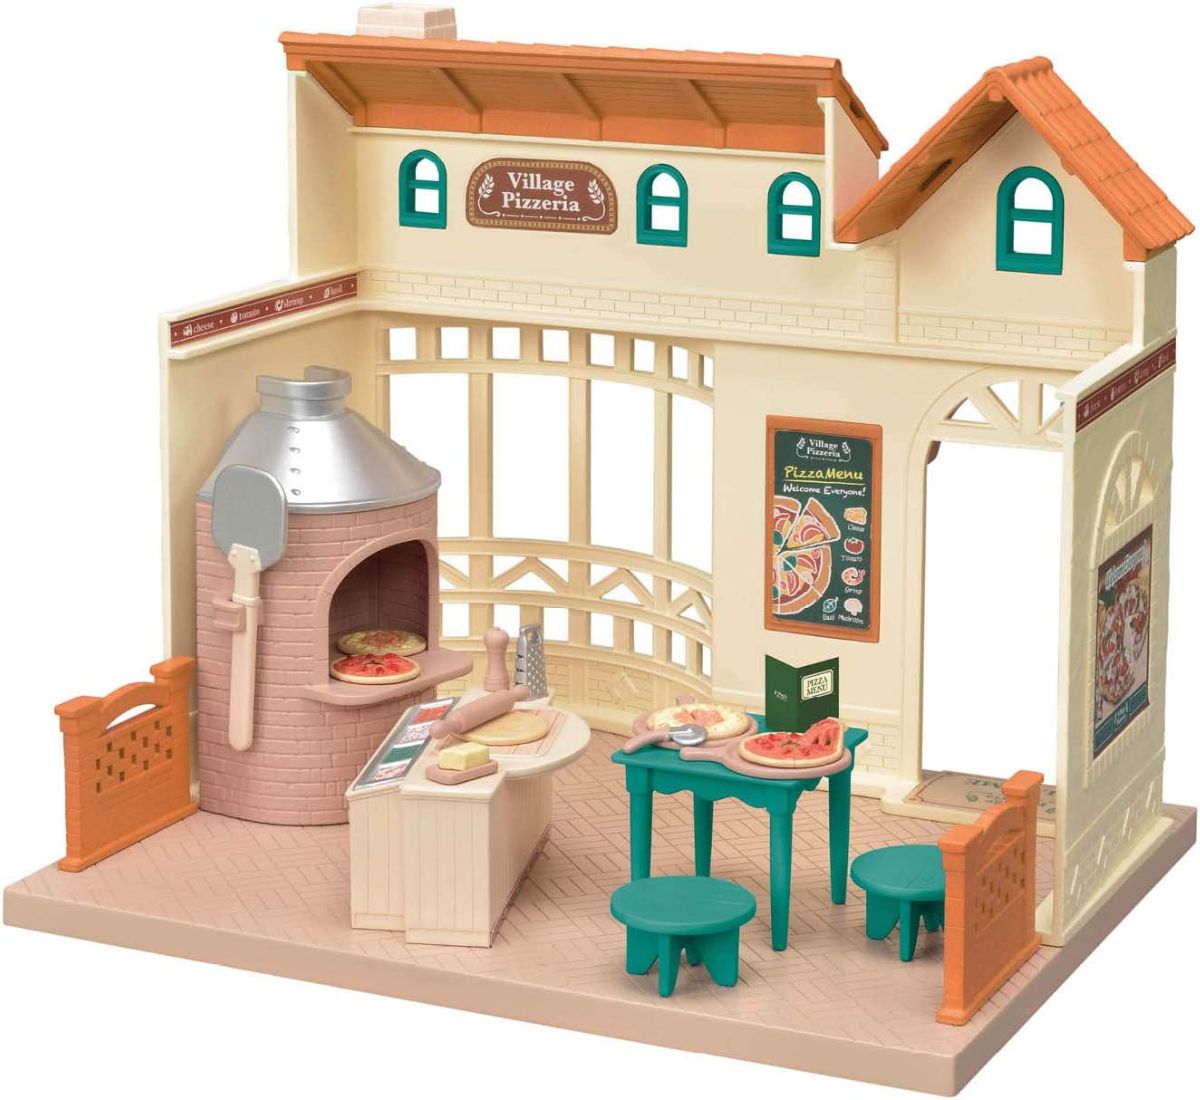 Calico Critters Village Pizzeria Playset